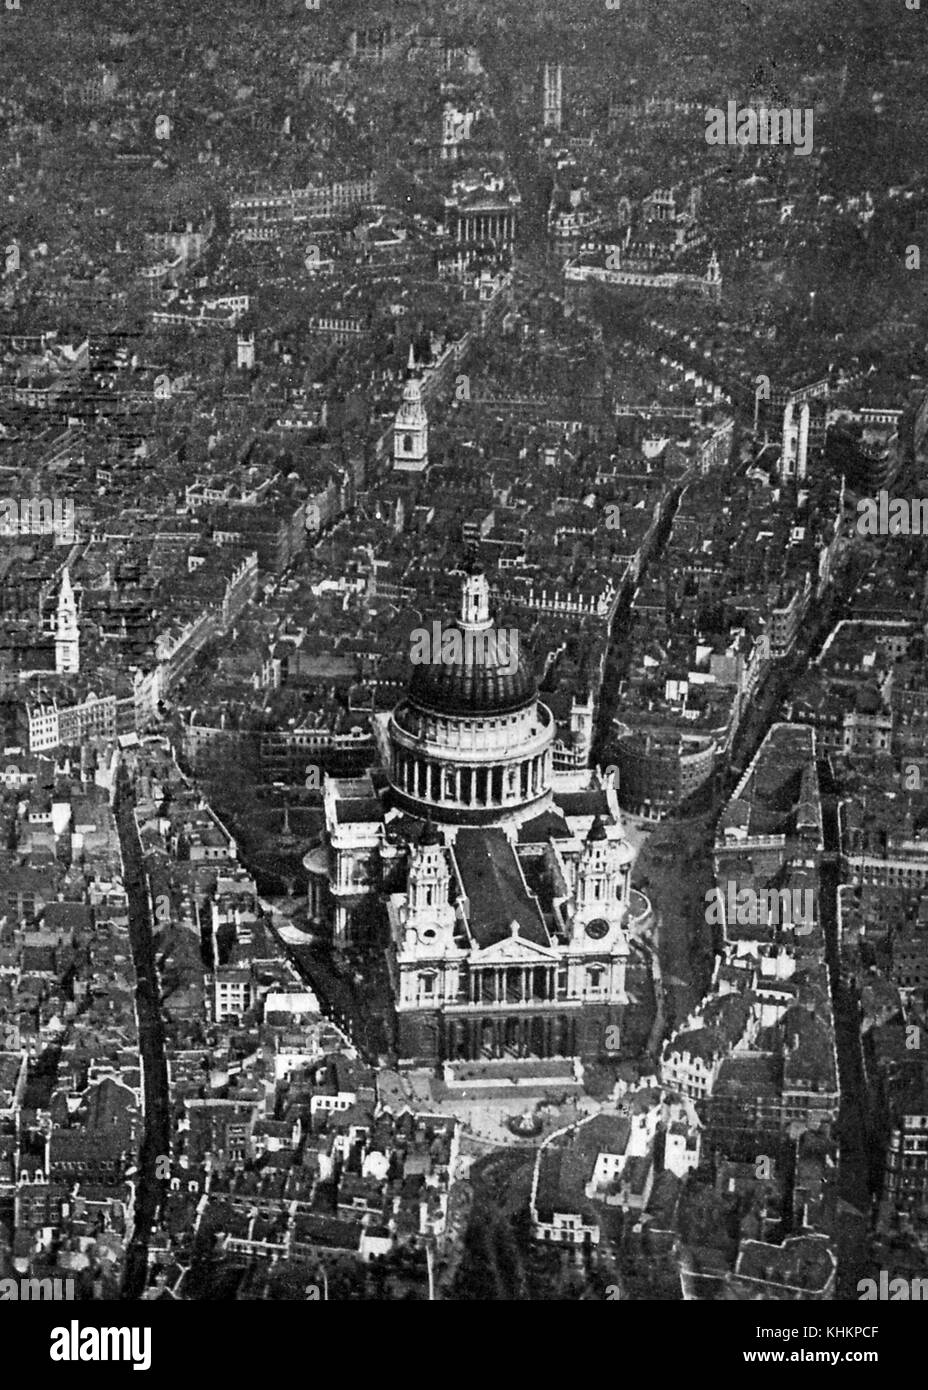 Aerial view of Saint Paul's Cathedral, Renaissance building in the heart of London, and burial place of the famous naval and military heroes of Great Britain, picture by Central Aerophotos Company, Limited for the article Cathedrals of the Old and New World, July, 1922. Stock Photo